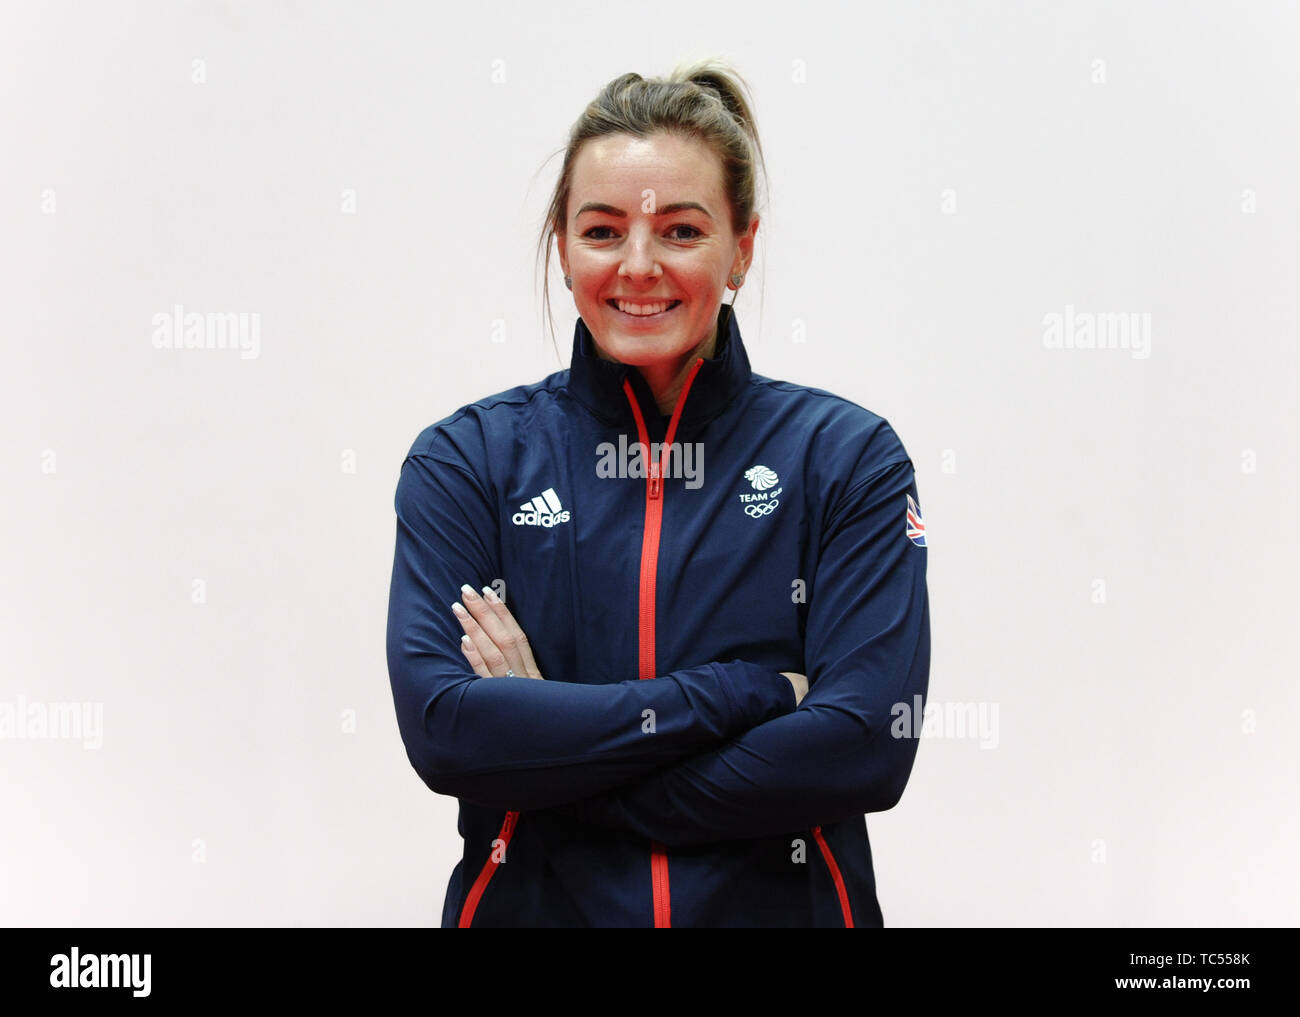 Katy Marchant during the kitting out session for the 2019 Minsk European Games at the Birmingham NEC. Stock Photo